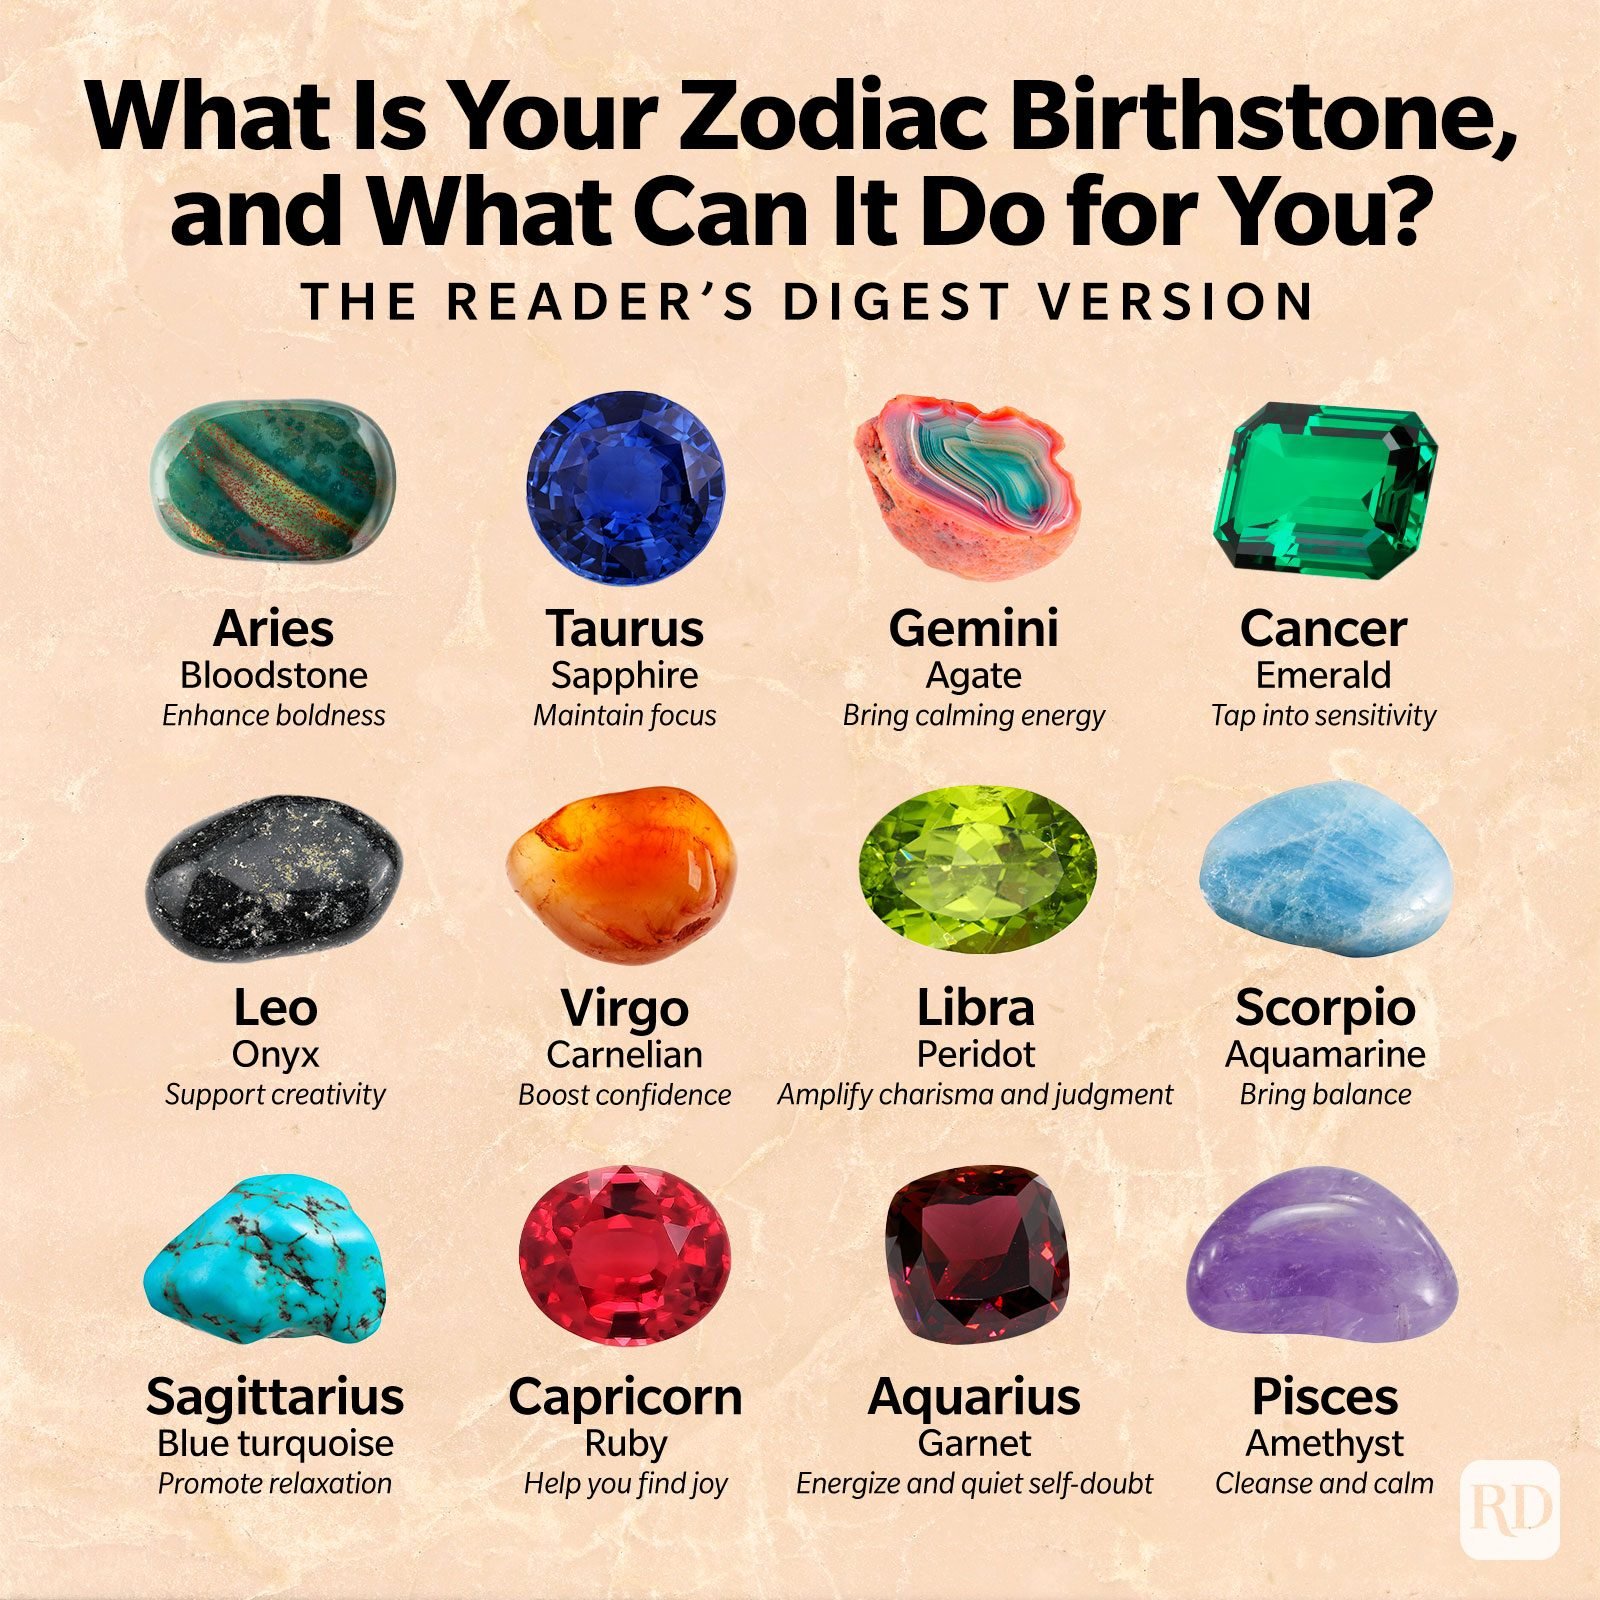 What Are Zodiac Birthstones, and How Can They Unlock Your Potential?